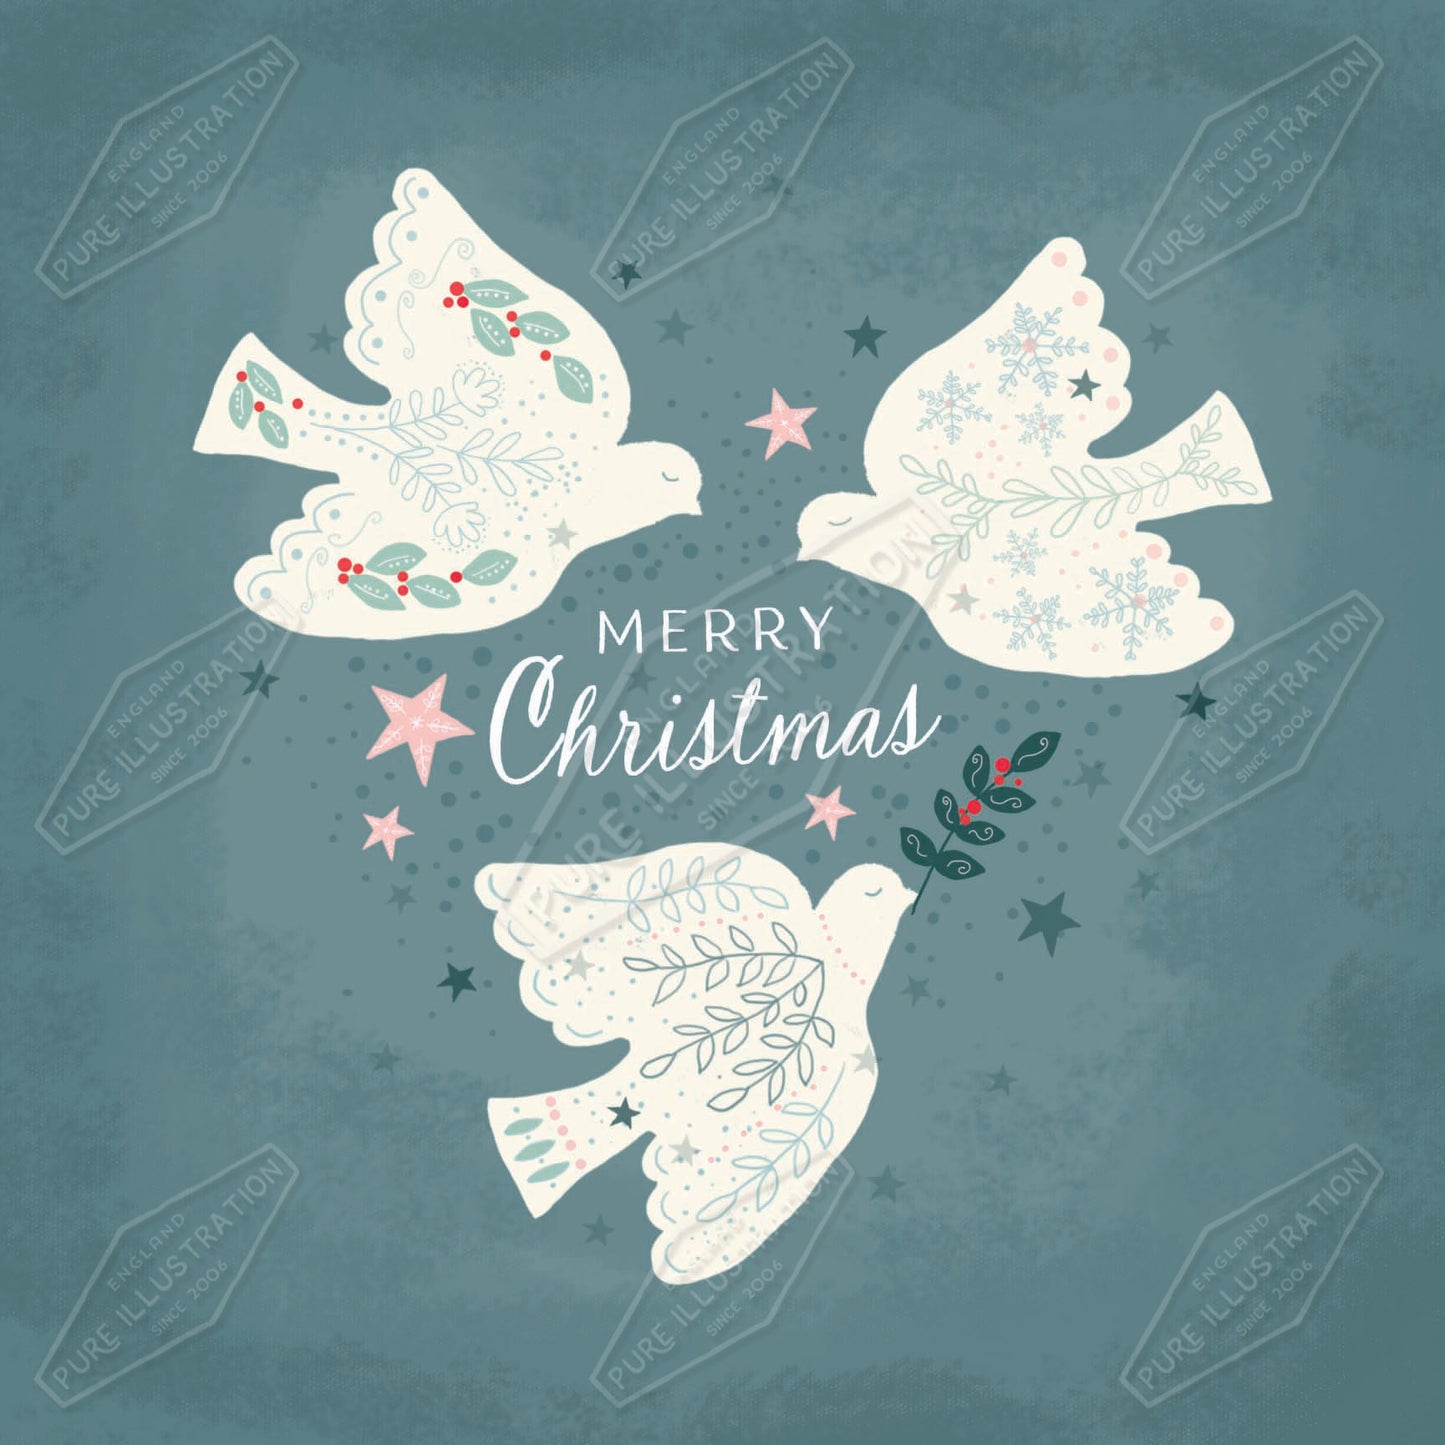 00035405SLA- Sarah Lake is represented by Pure Art Licensing Agency - Christmas Greeting Card Design